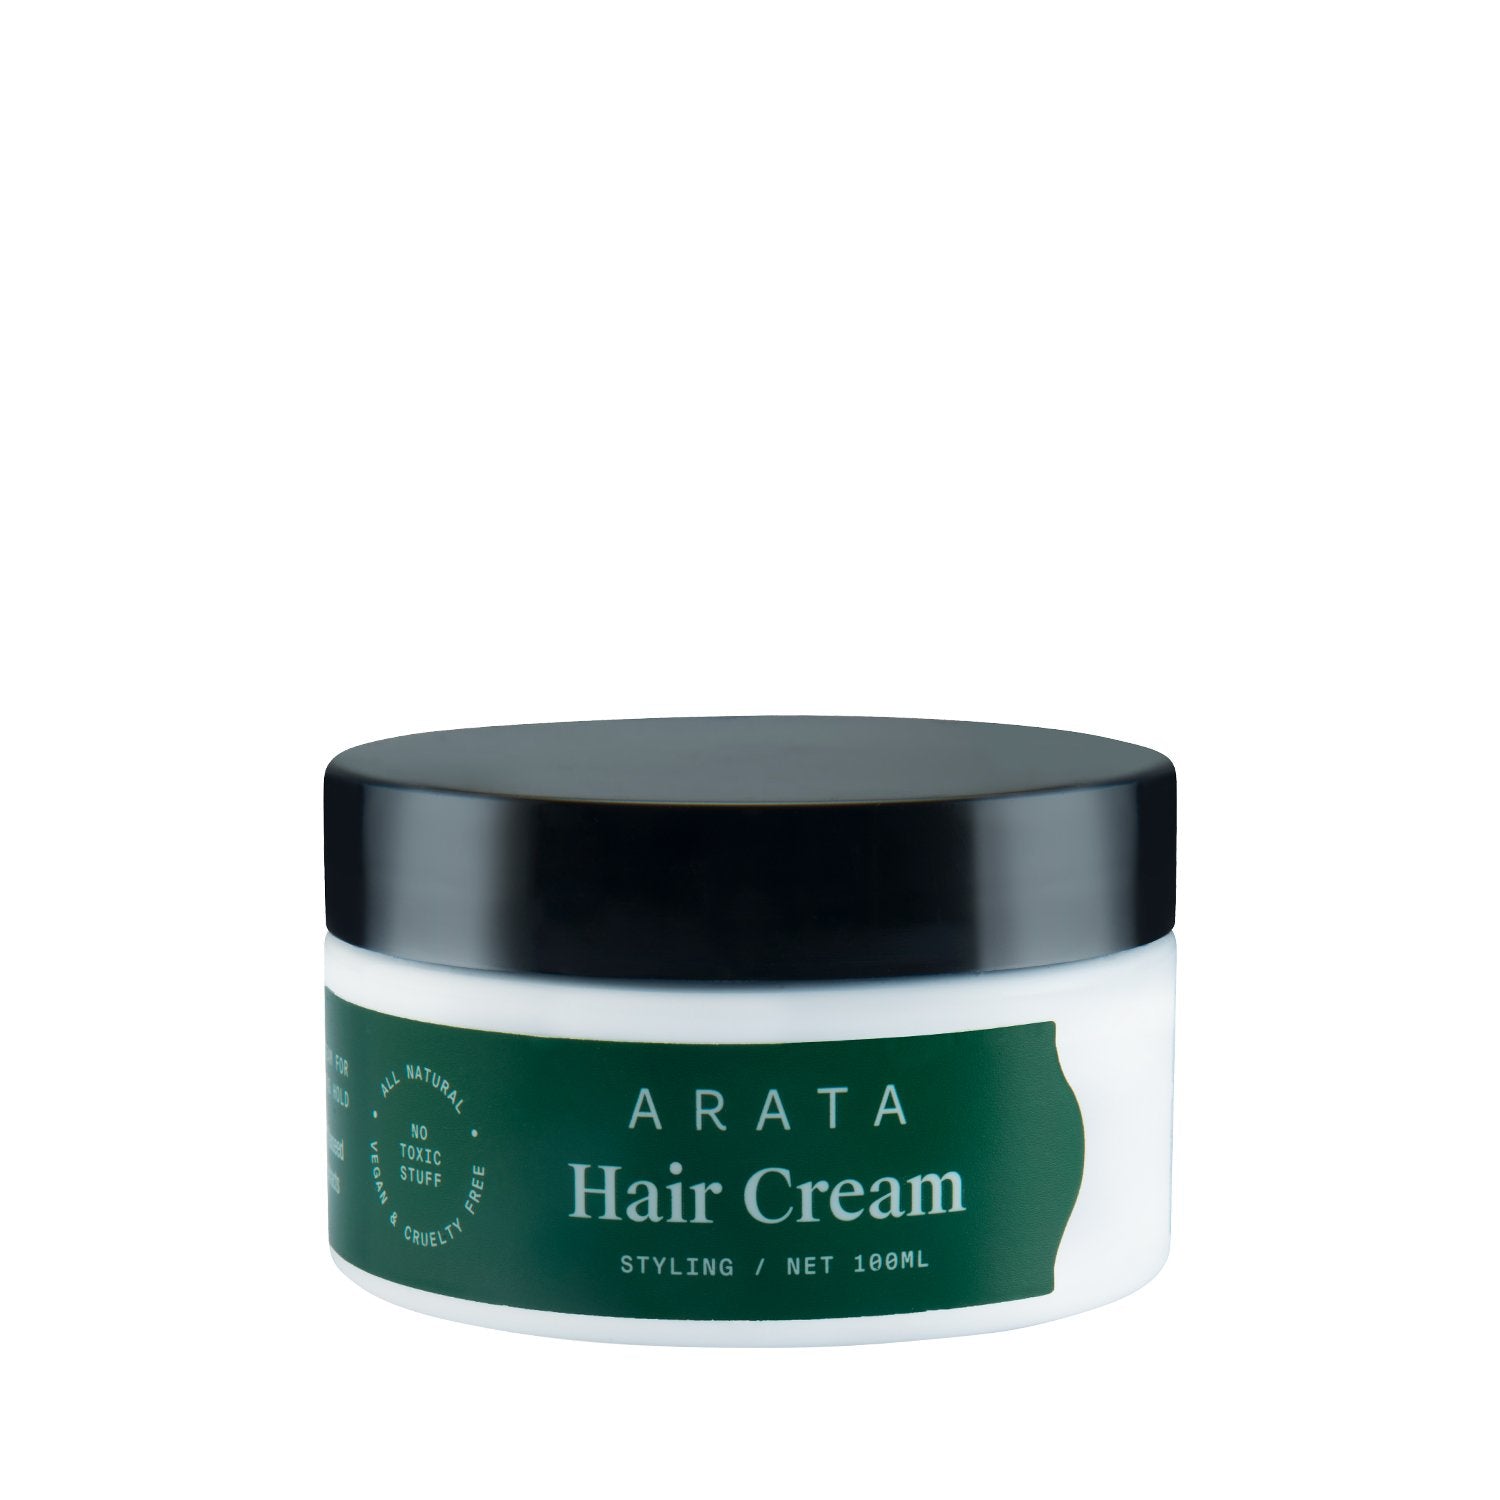 Arata Natural Styling & Hold Hair Cream | All-Natural, Vegan & Cruelty-Free | Styling & Hair Growth Formula 100g